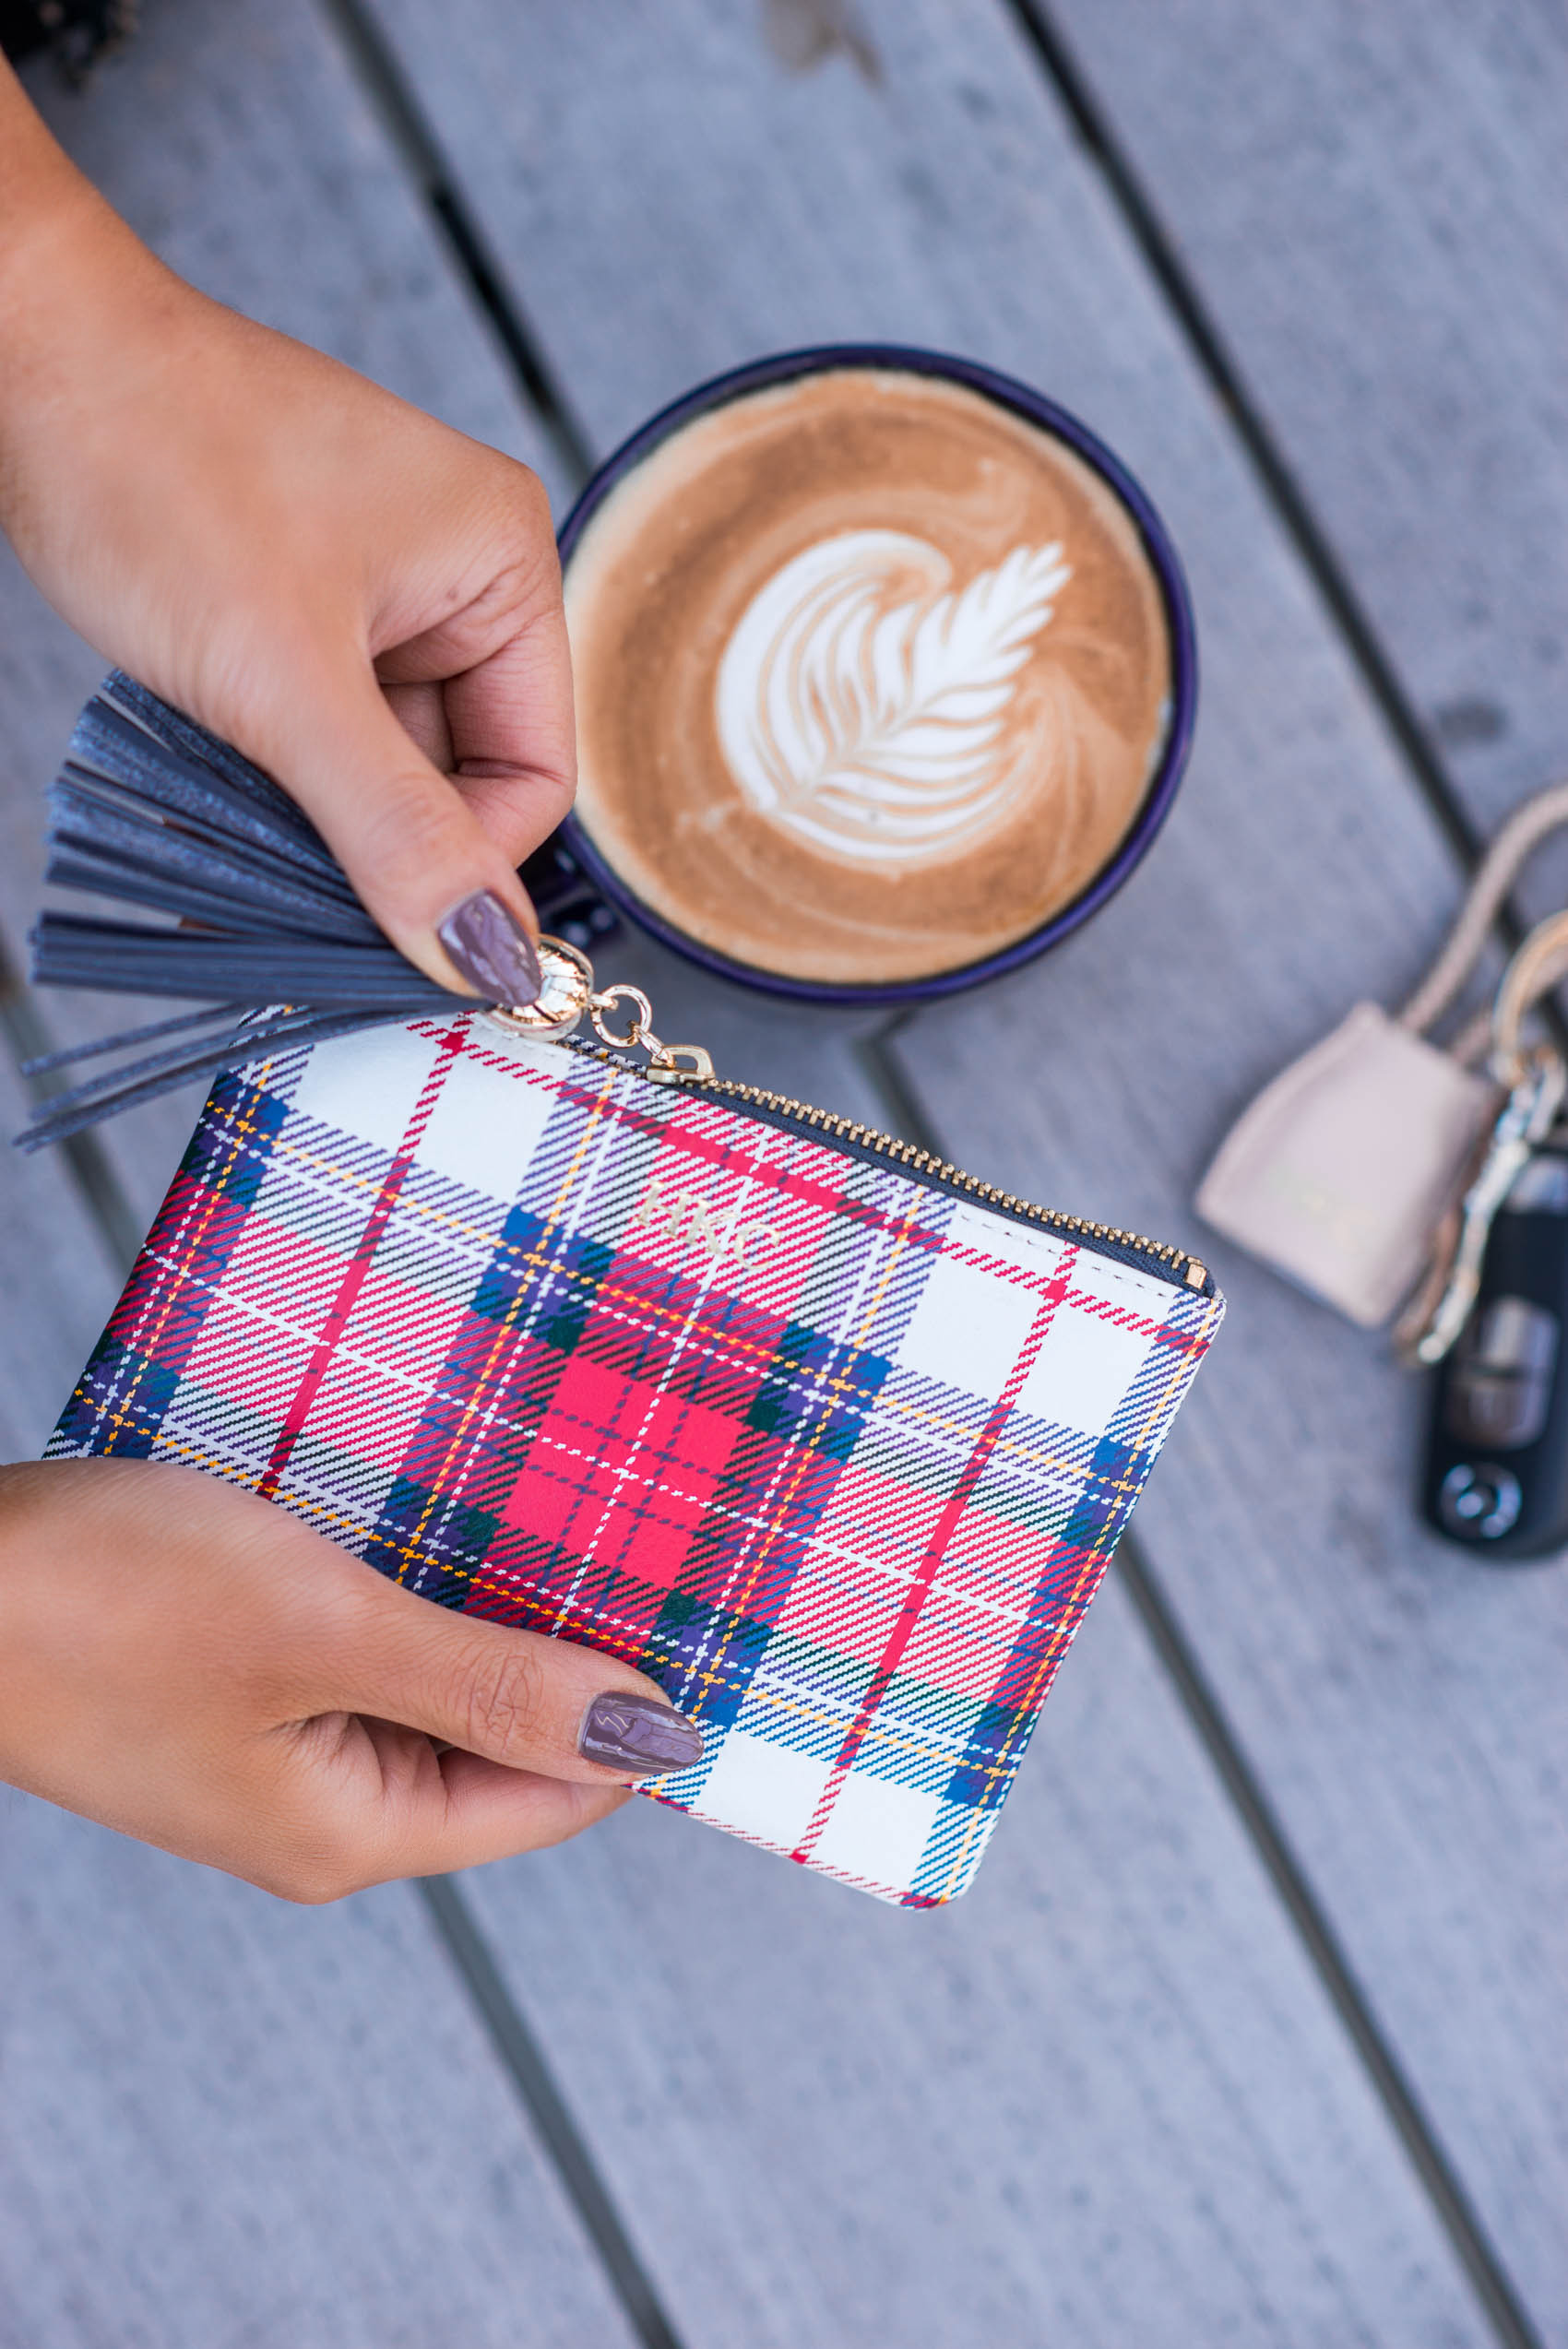 Hoang-Kim shares a plaid leather pouch from Mark & Graham as a practical gift to give